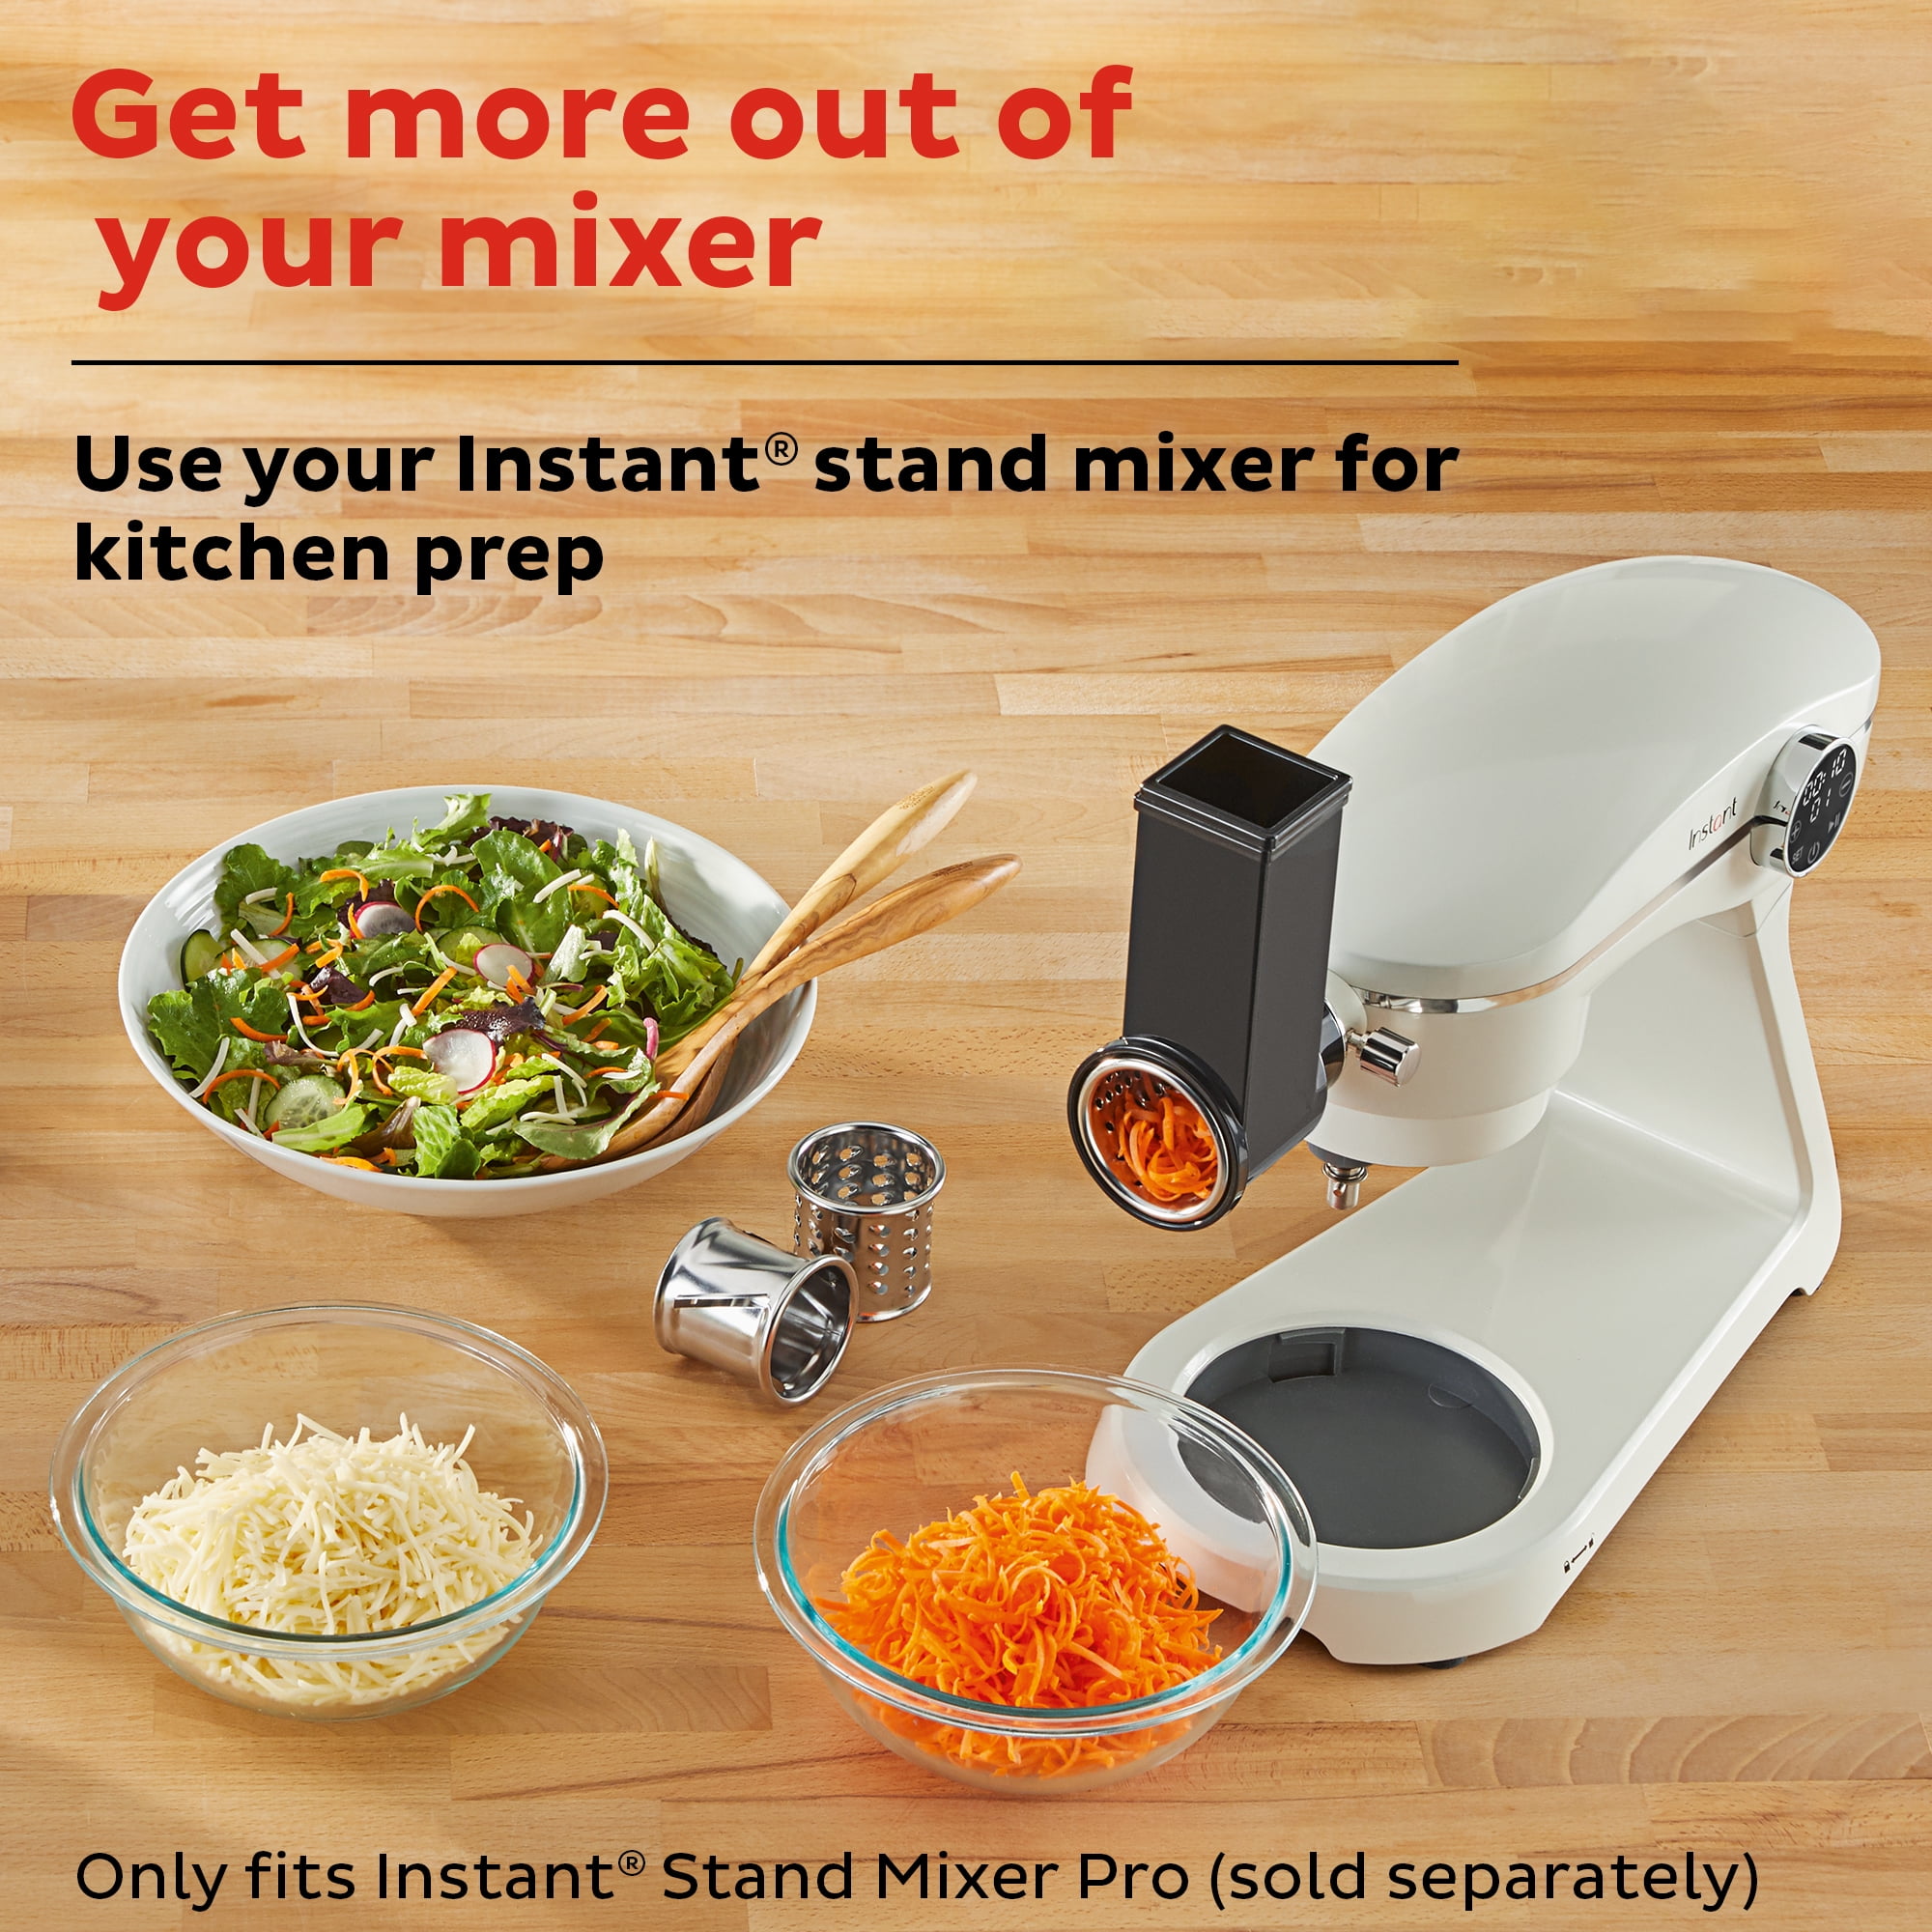 Hi! So my mom recent passed on this slicer/shredder attachment